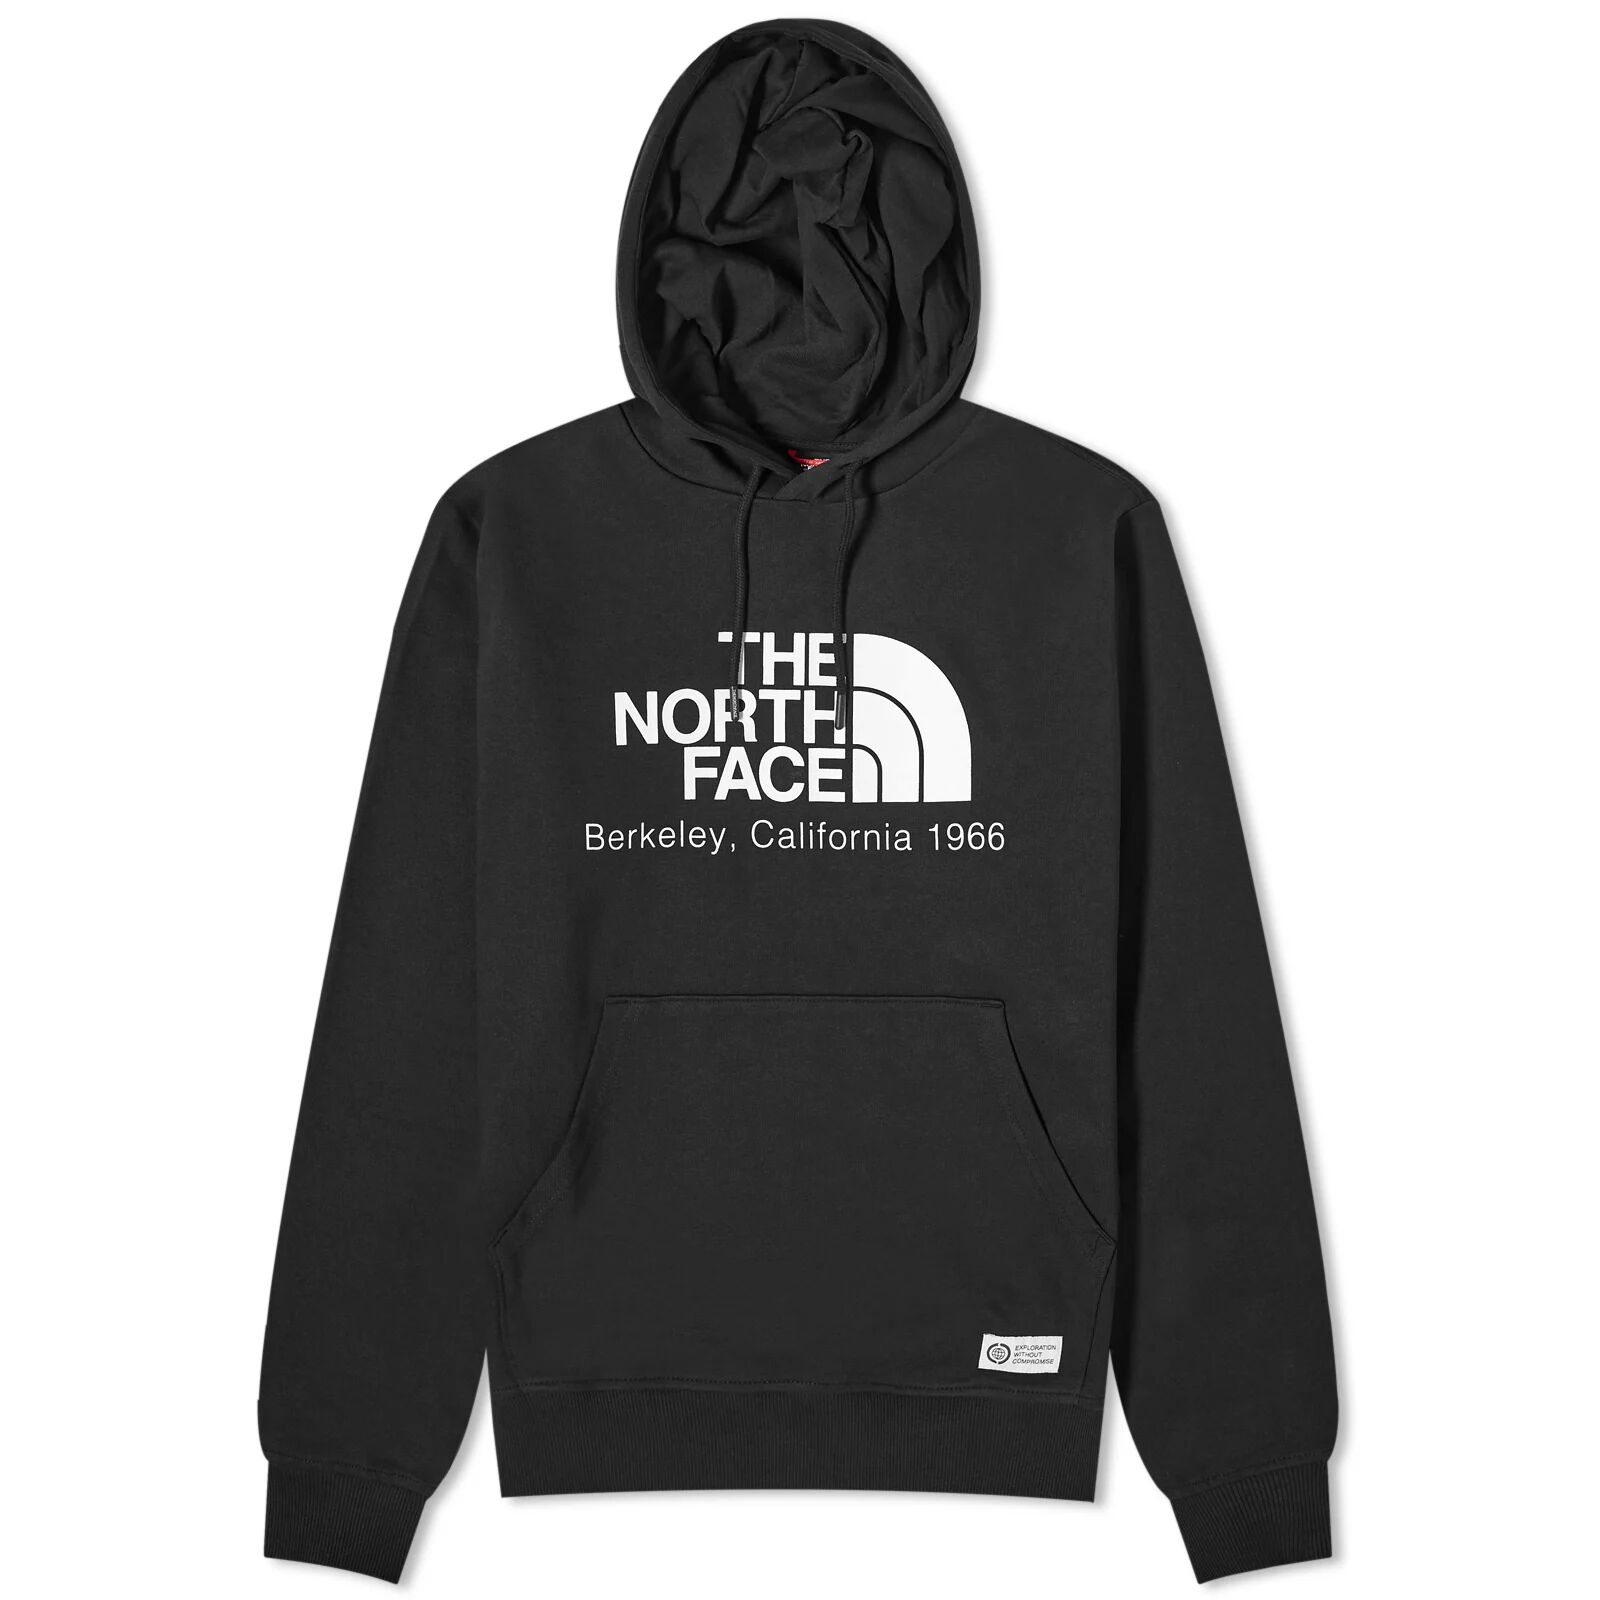 The North Face Men's Berkeley California Hoodie in Tnf Black, Size X-Large